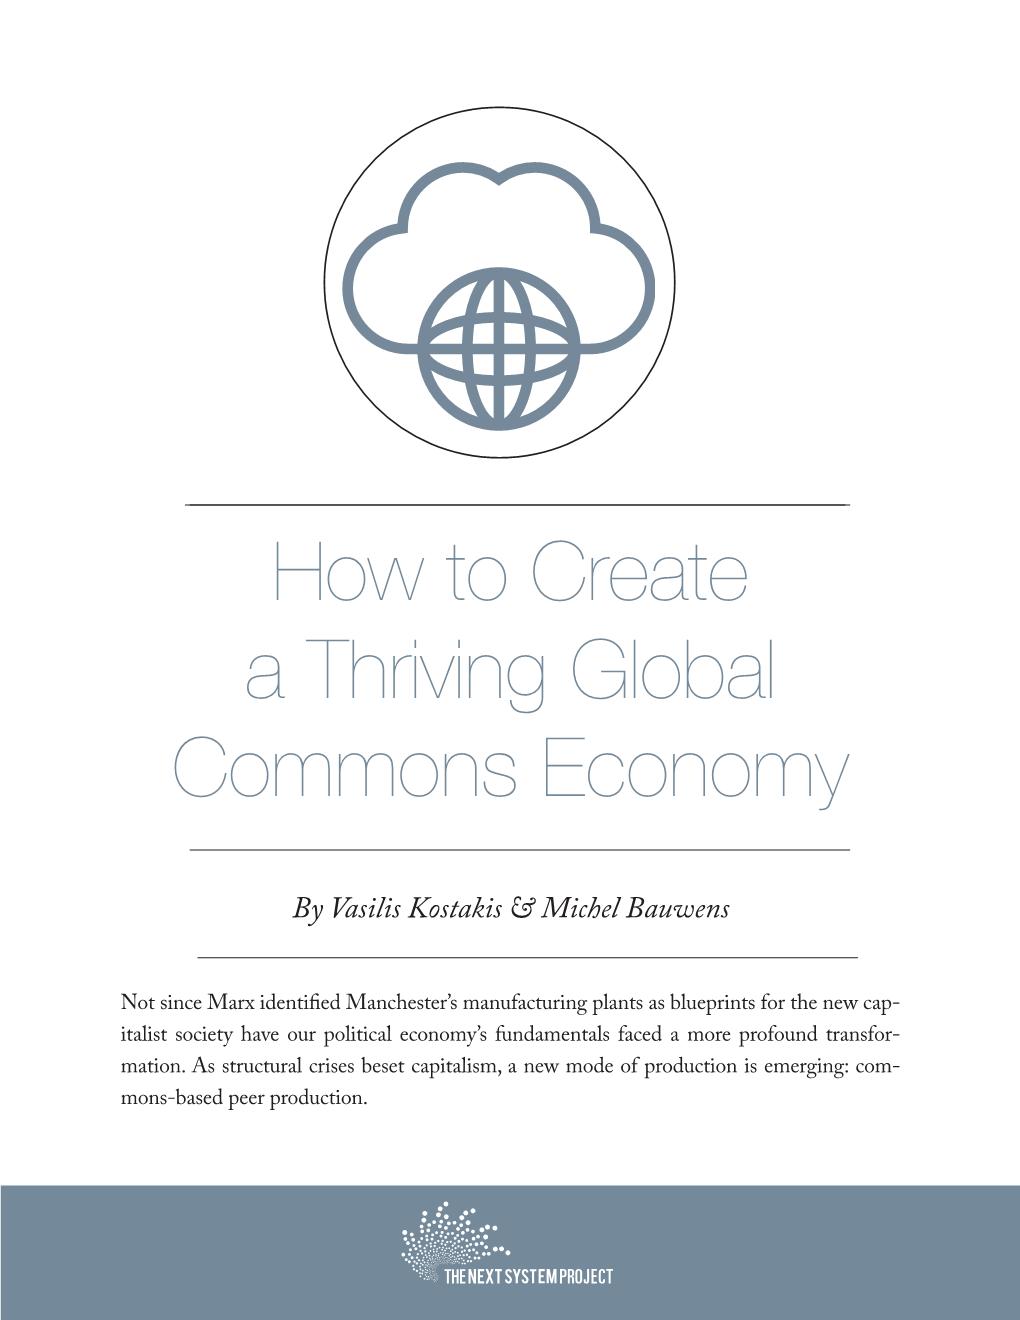 How to Create a Thriving Global Commons Economy